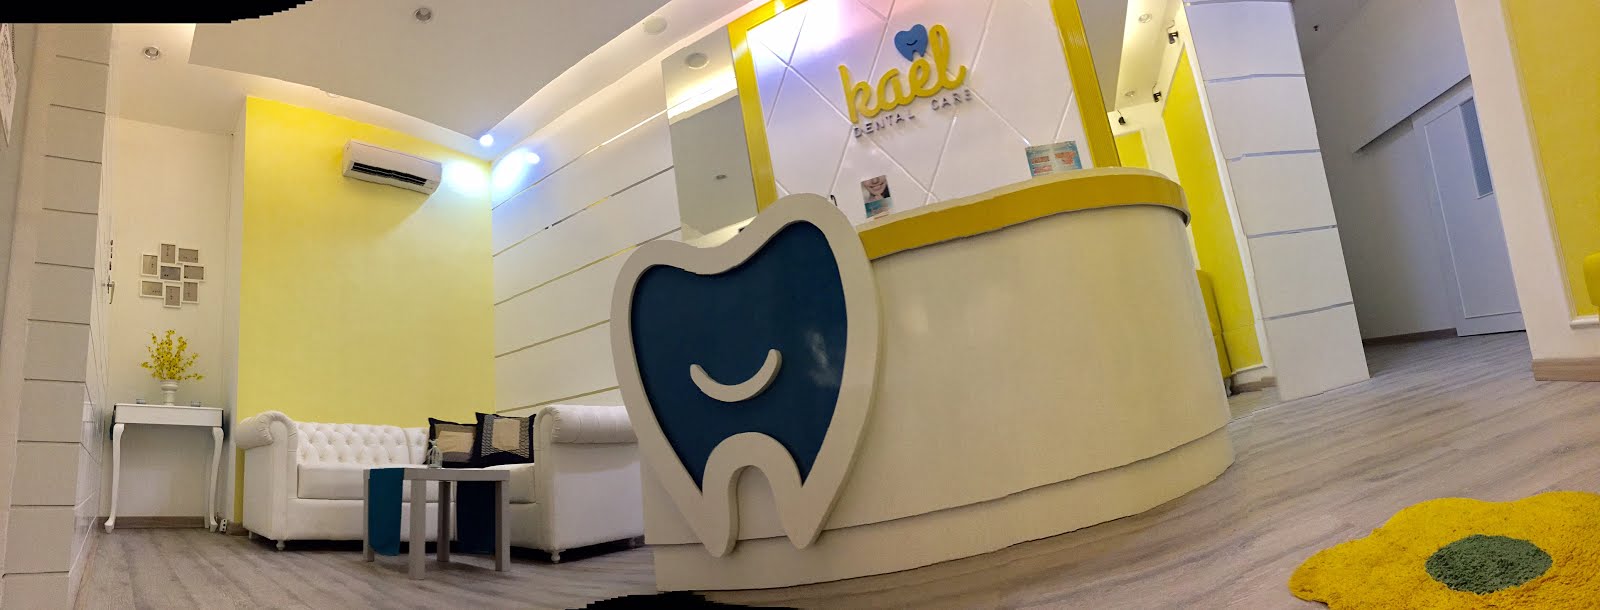 Kael Dental Care and Aesthetic